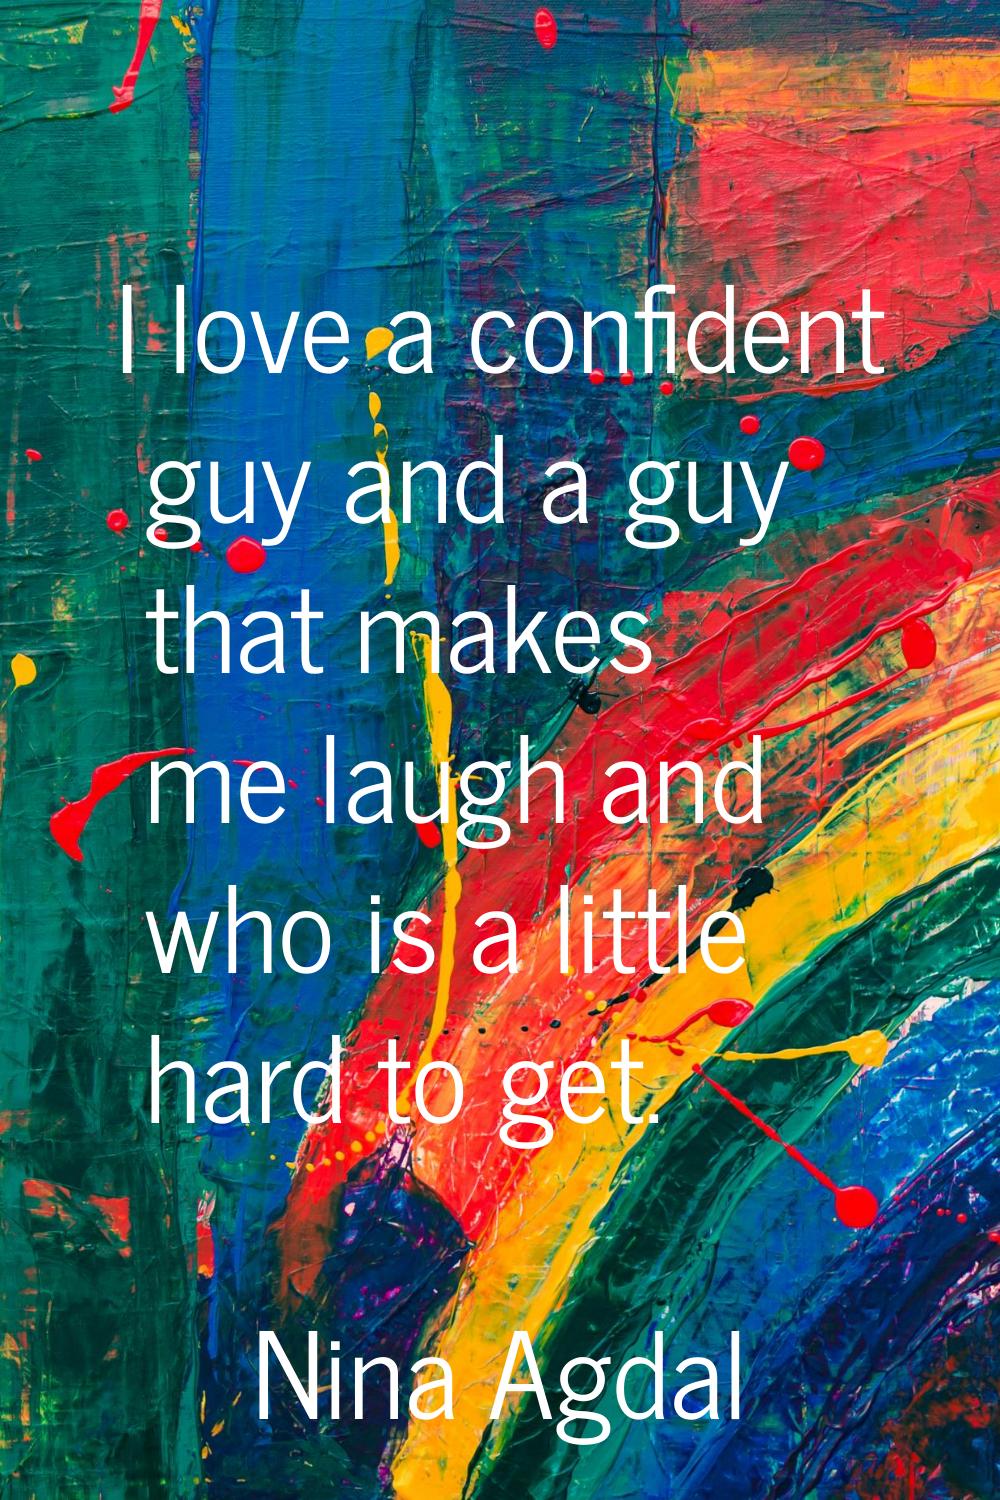 I love a confident guy and a guy that makes me laugh and who is a little hard to get.